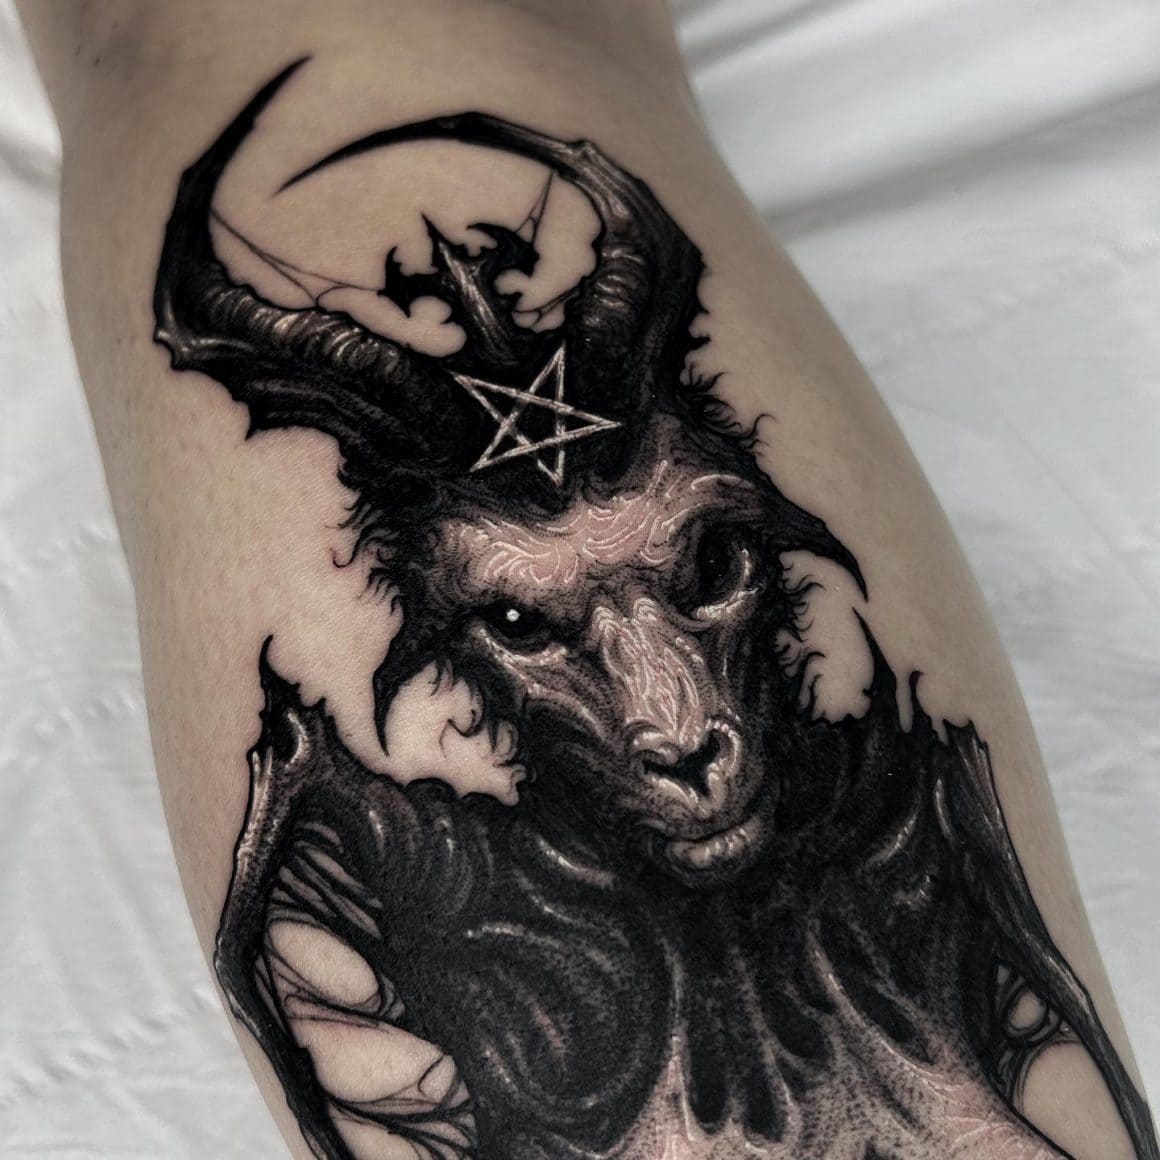 Baphomet on my friend @lycanyou. Thank you for trusting me with such a  meaningful piece 🙏🏿 Made @tildeathdenver.… | Capricorn tattoo, Tattoos,  Back of neck tattoo